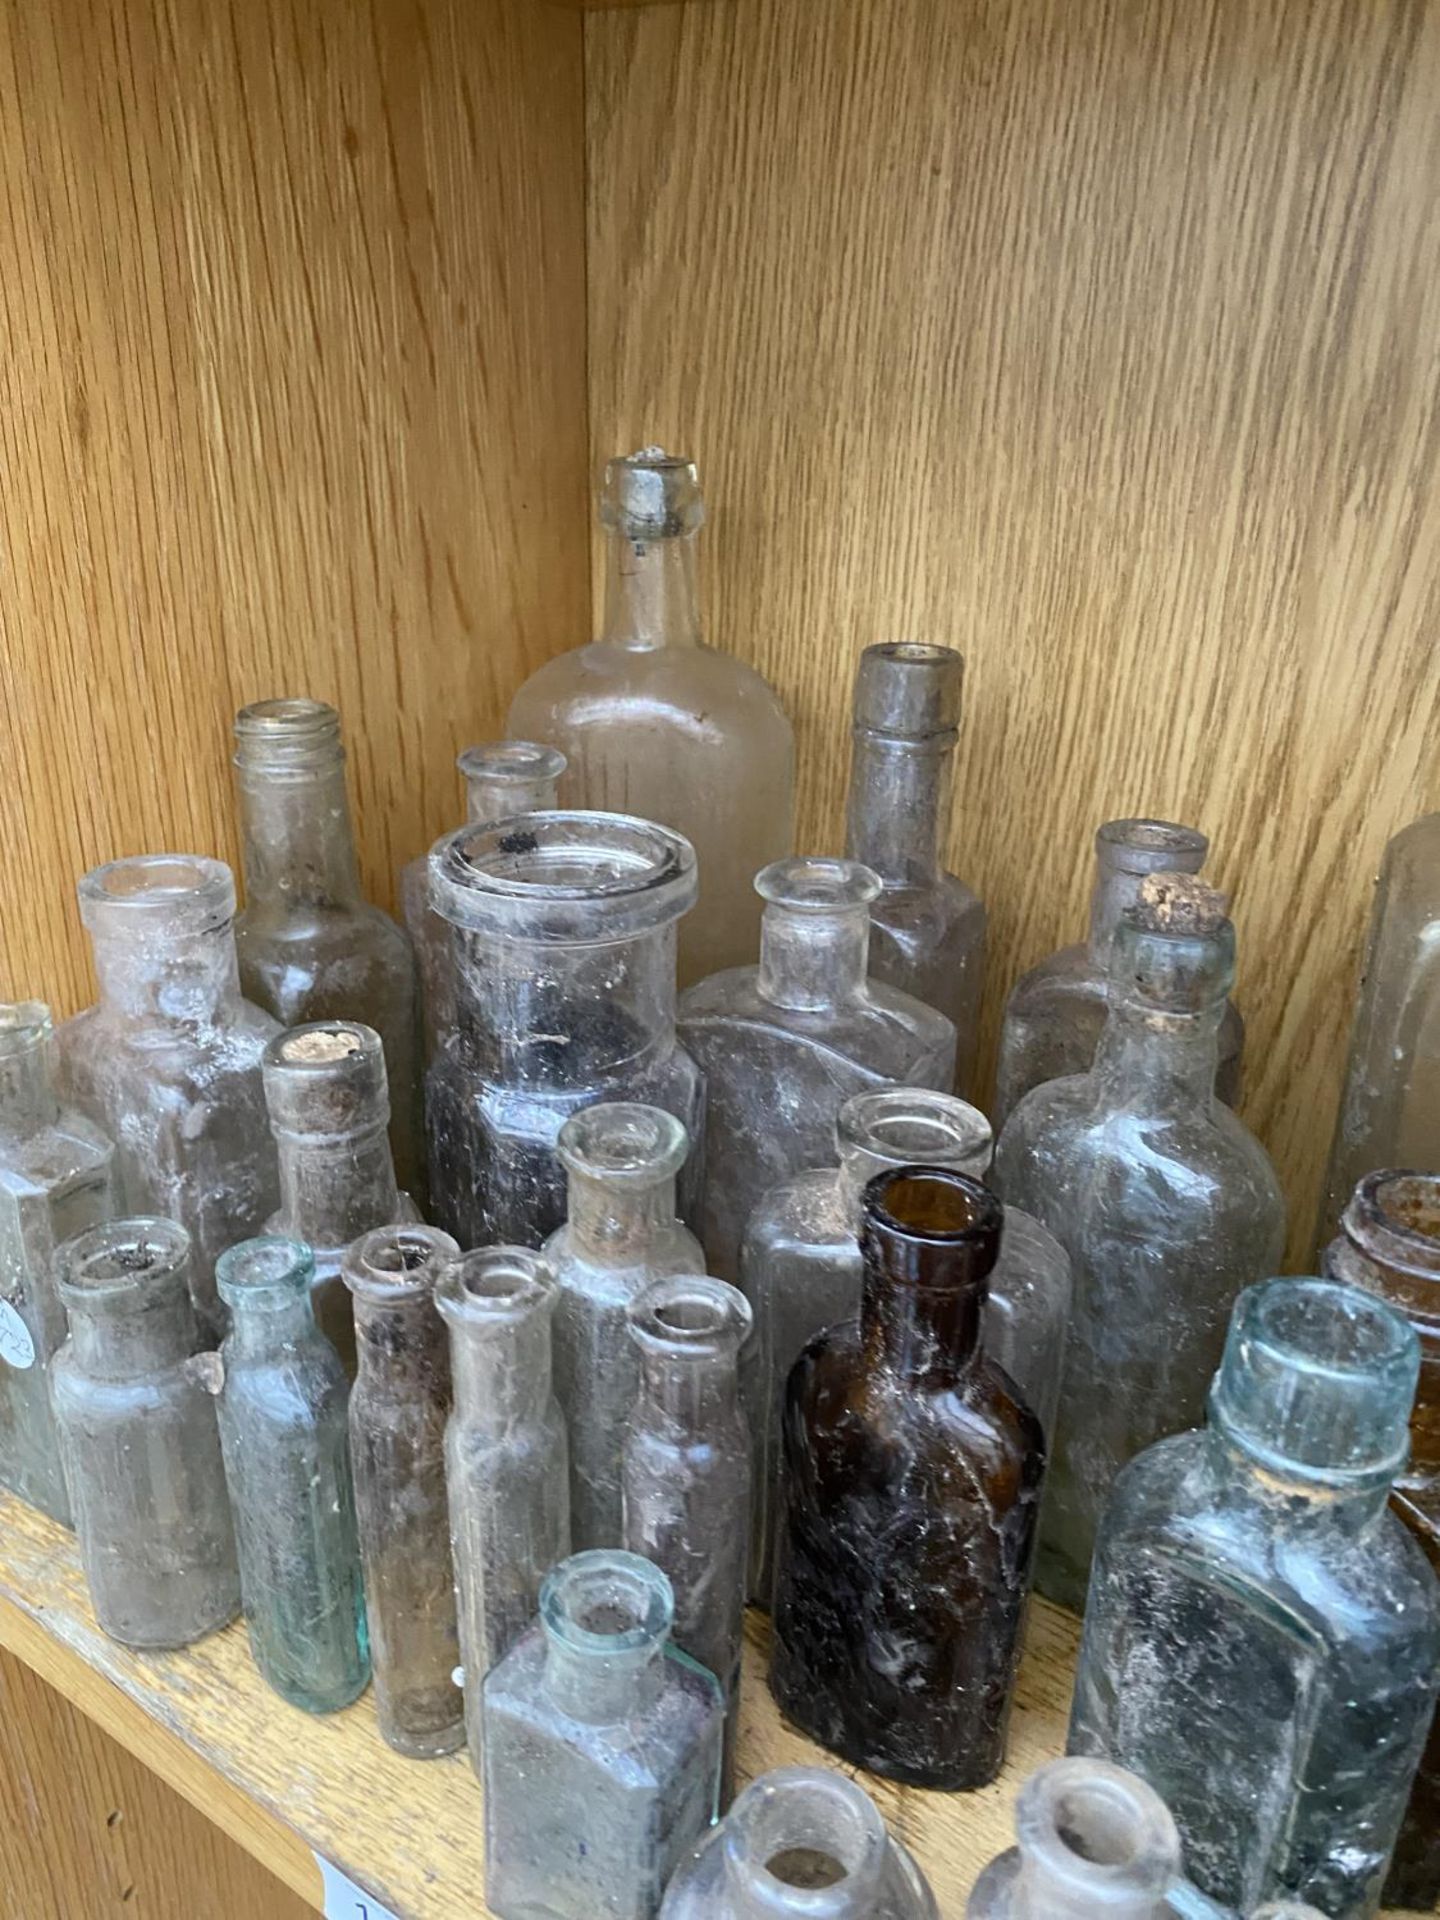 A LARGE QUANTITY OF MINITURE GLASS MEDICINE BOTTLES - Image 3 of 3